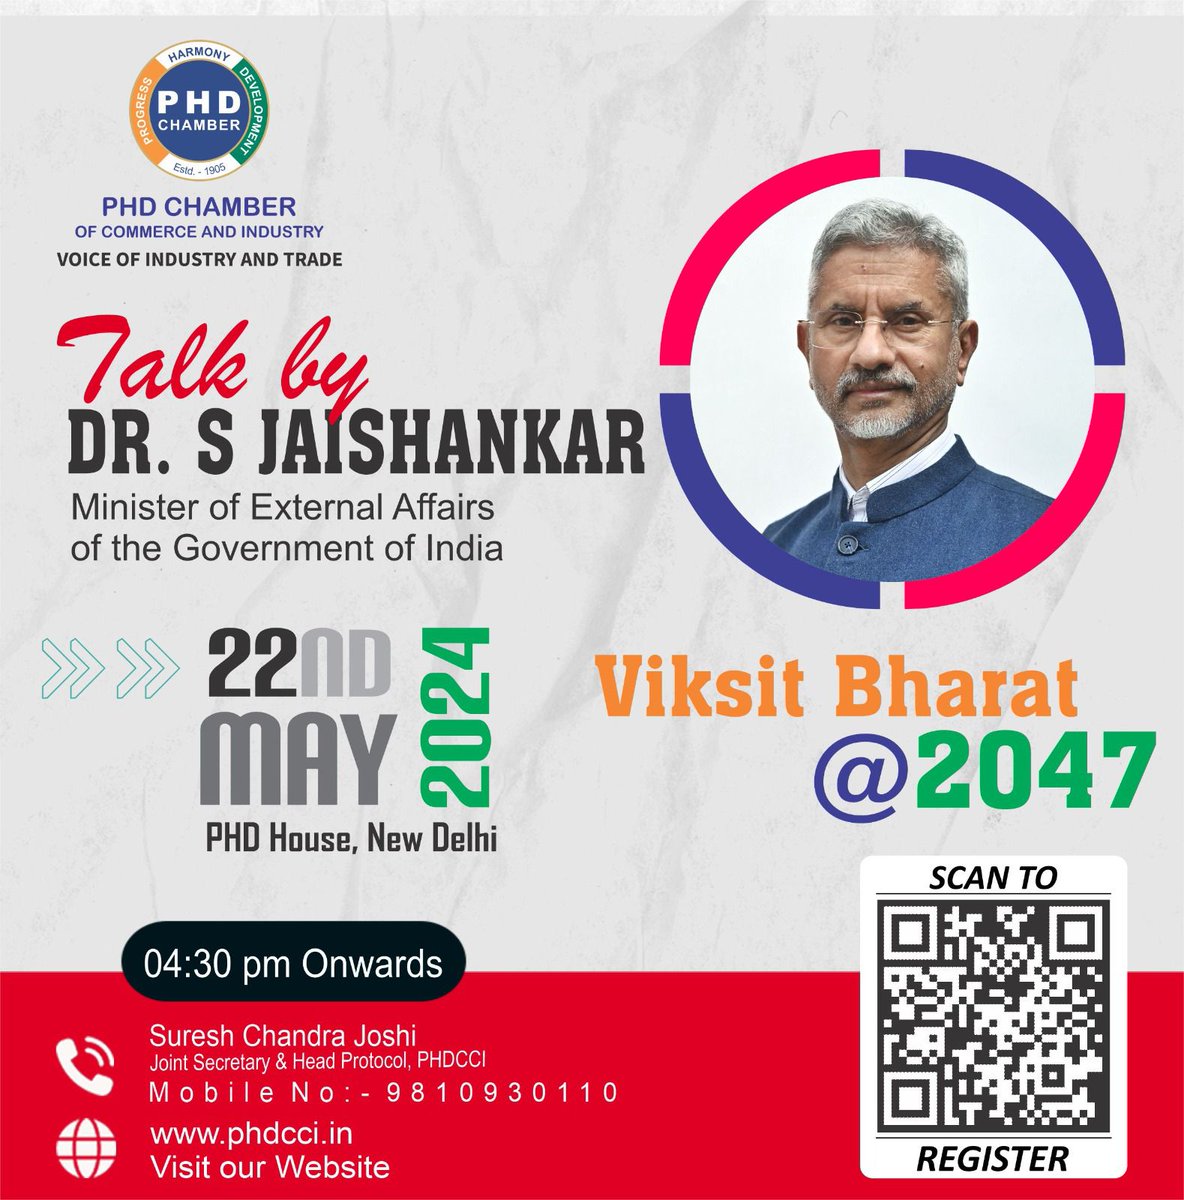 We are pleased to share that Dr. S. Jaishankar, the Hon’ble Minister for External Affairs of the Government of India, has graciously agreed to speak to the members of PHDCCI. Scan to register for the same! #phdcci #ministry #externalaffairs #interaction